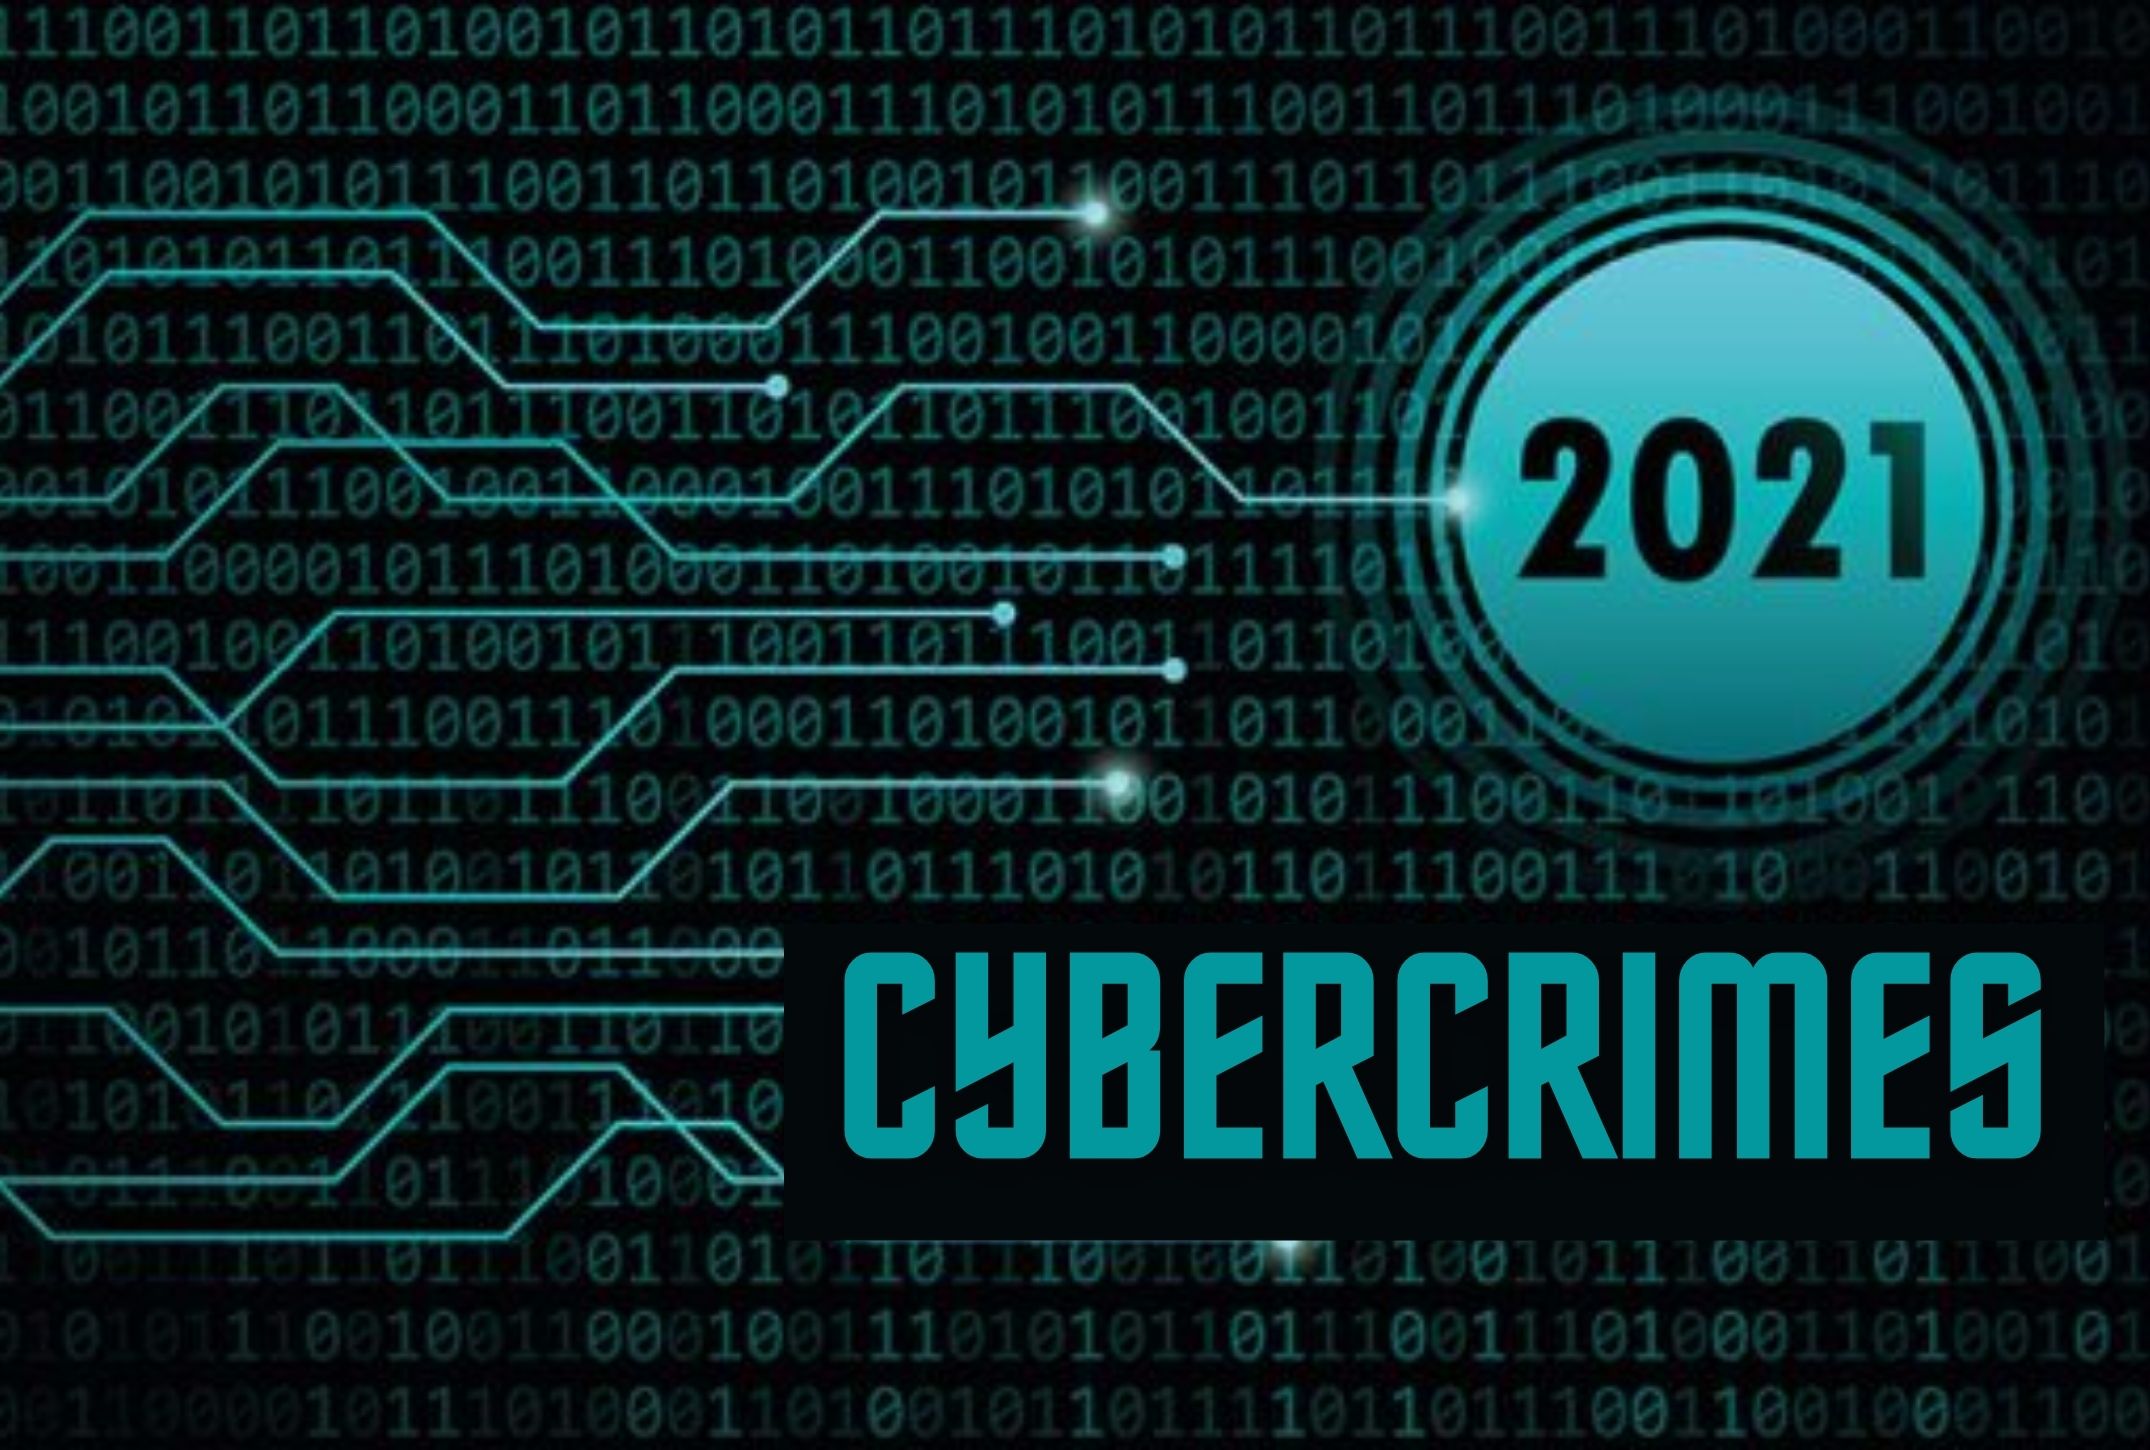 Astounding growth of Cybercrime in 2021